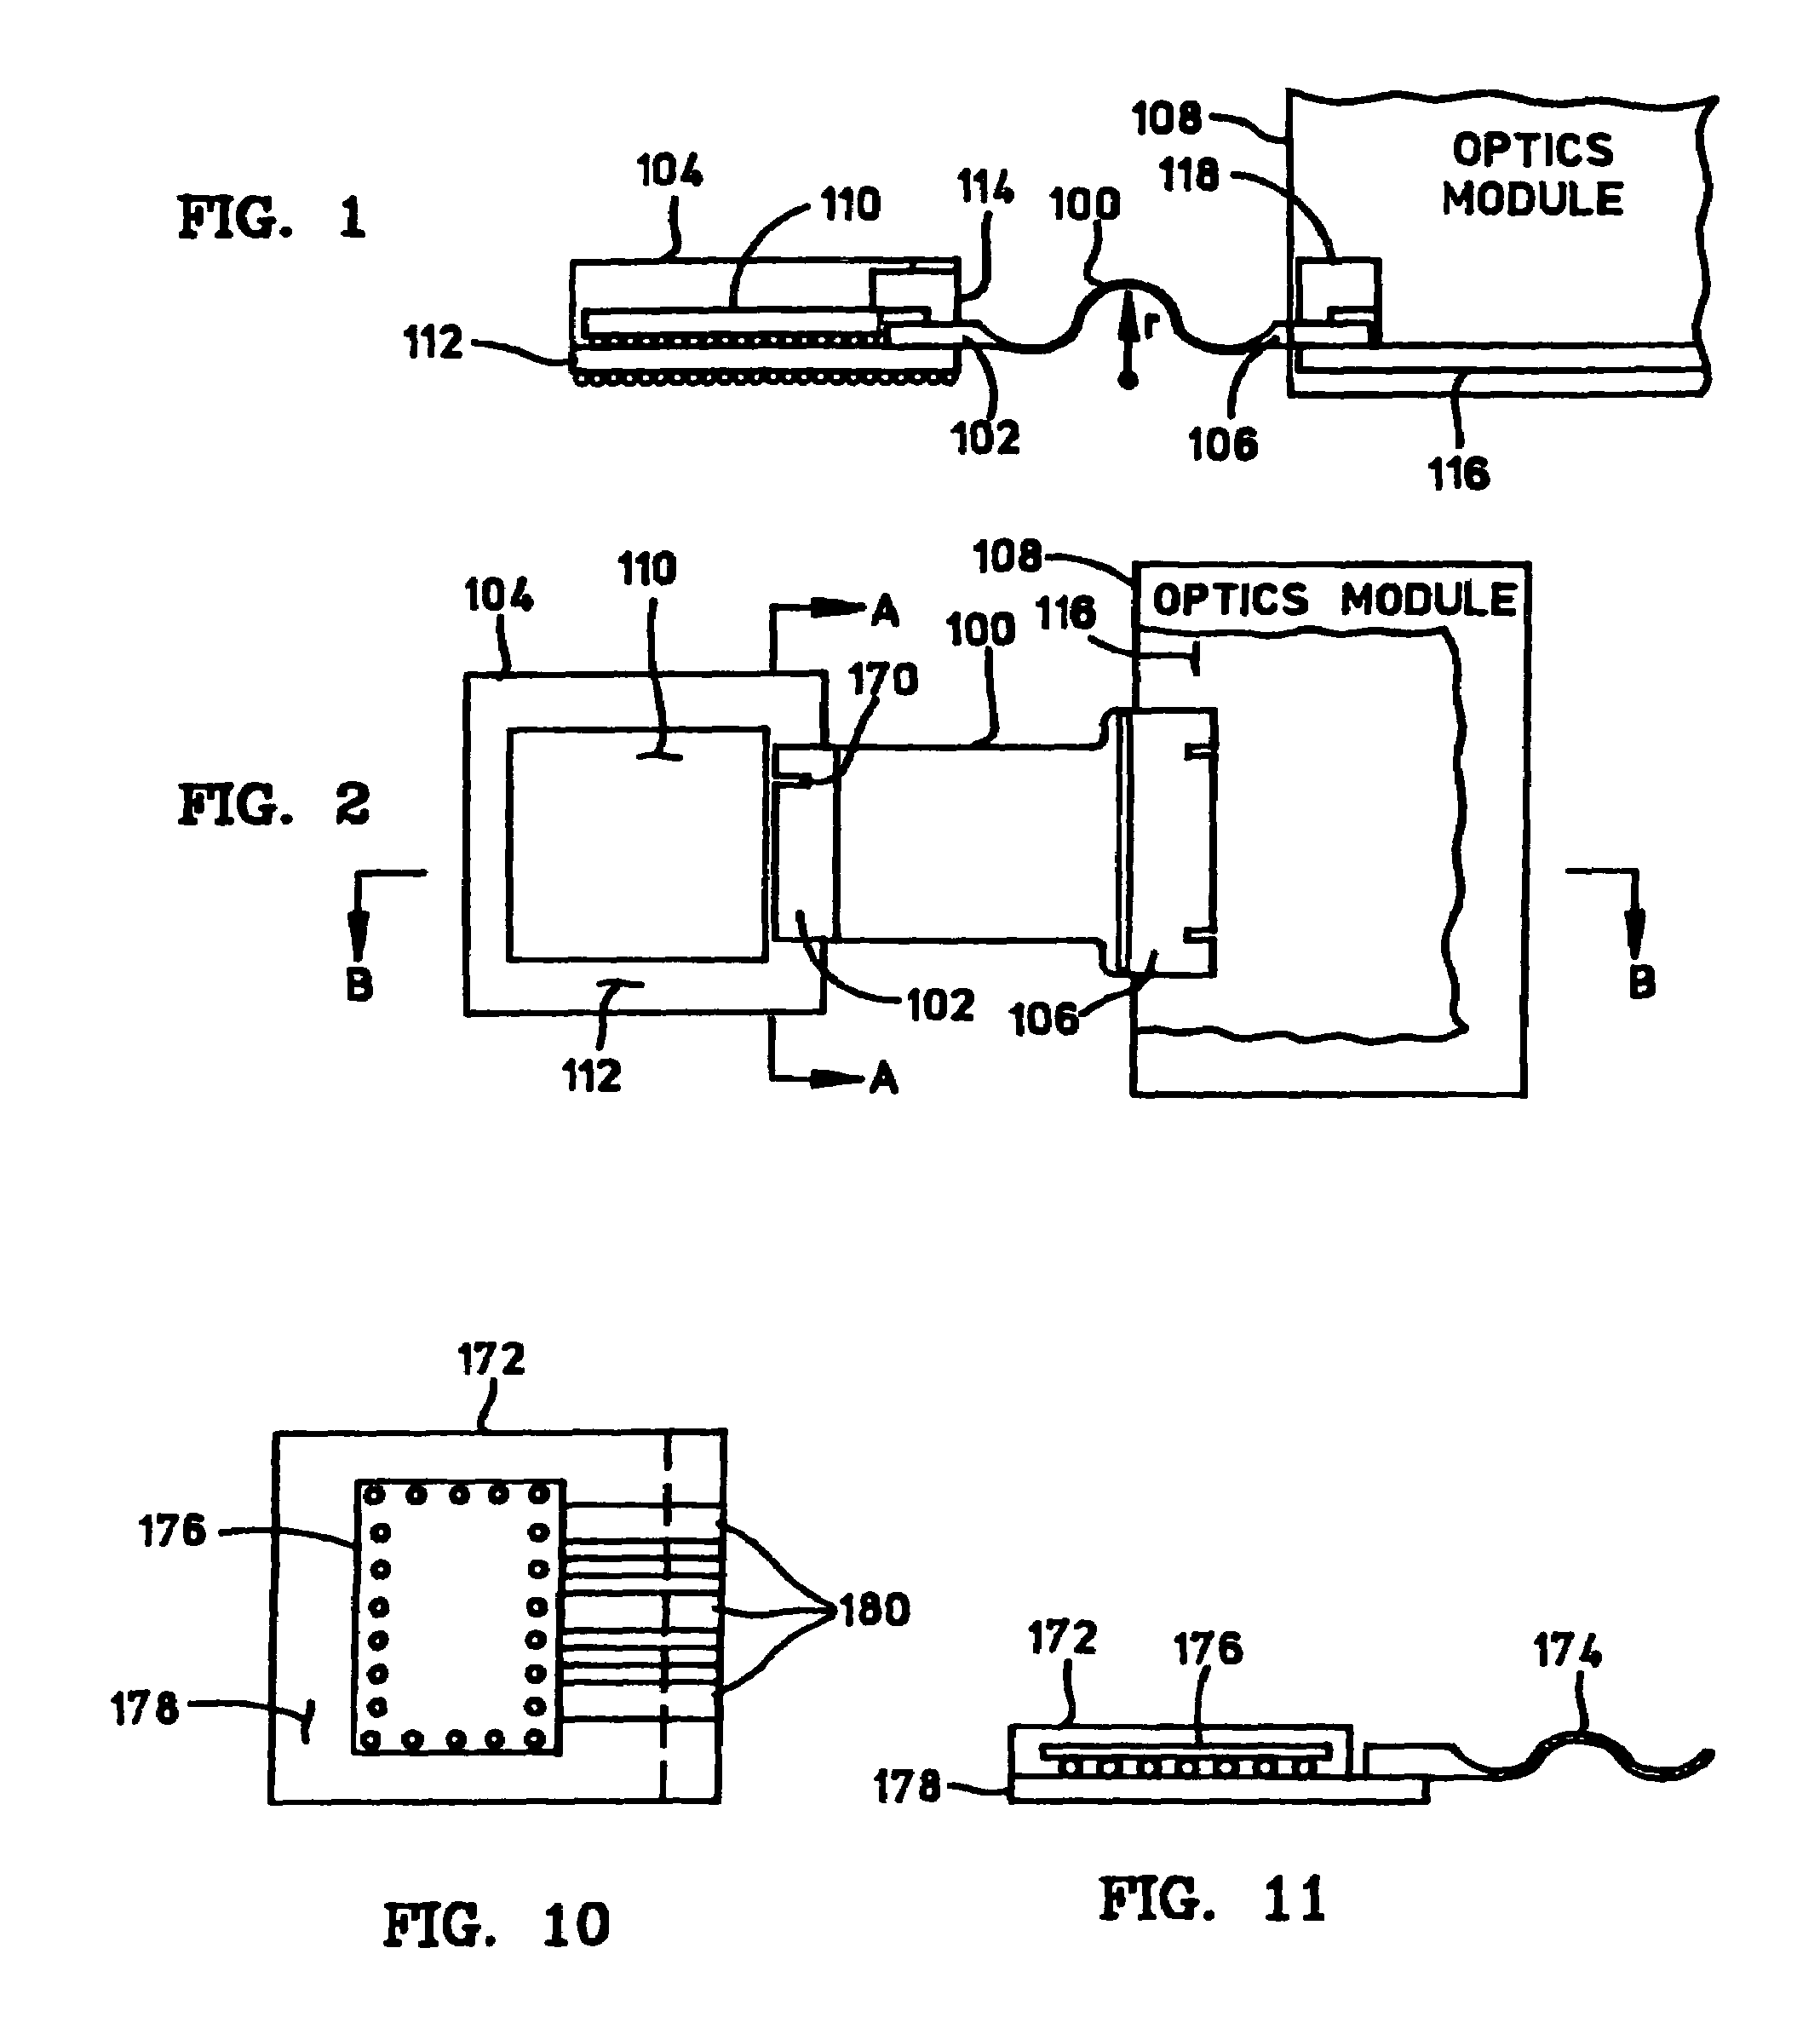 Flexible interconnect cable with grounded coplanar waveguide